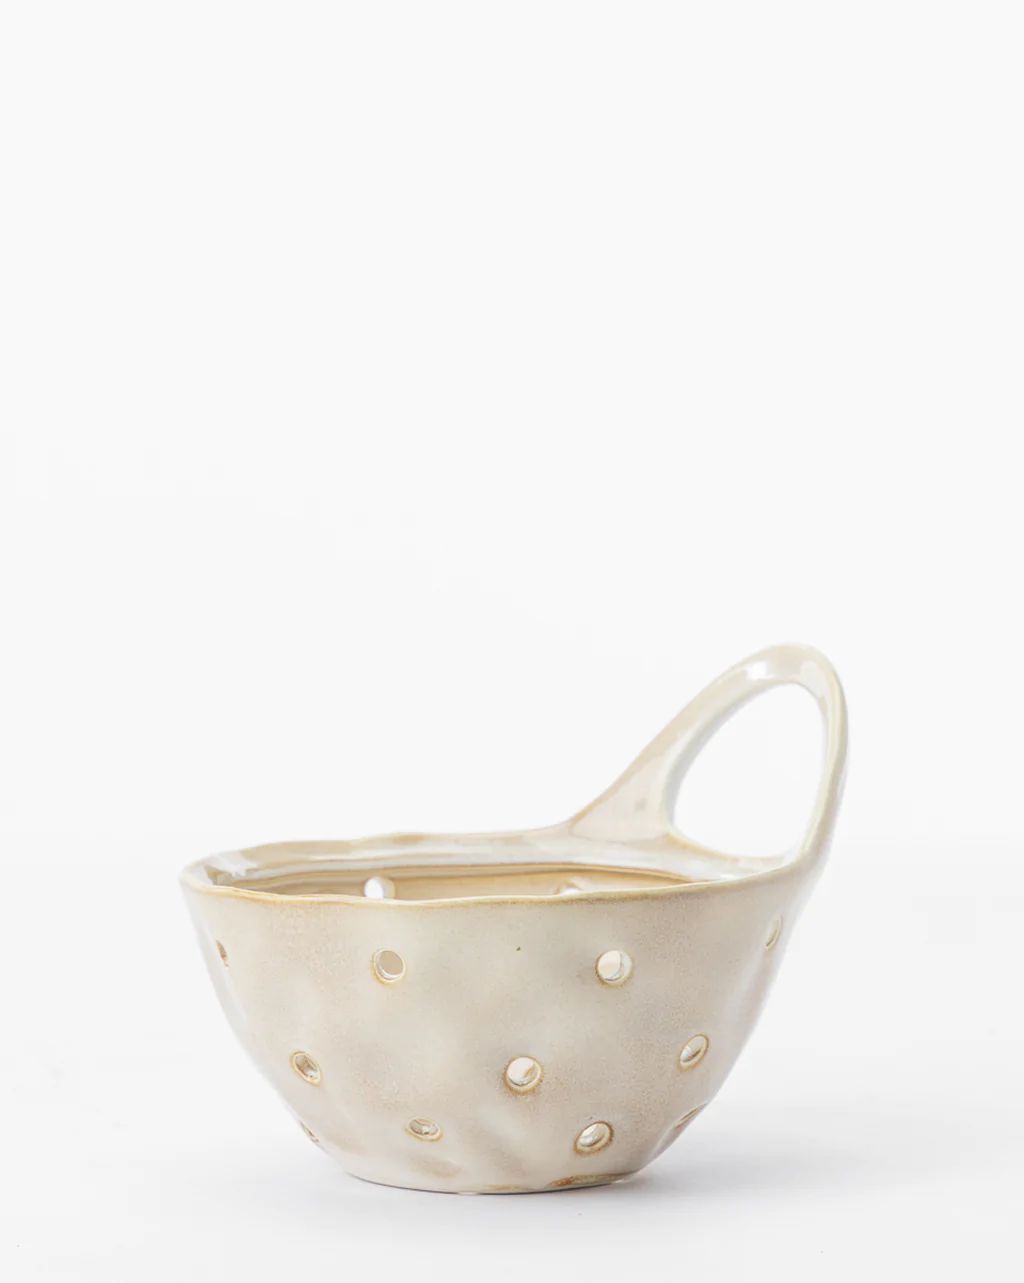 Handled Stoneware Berry Bowl | McGee & Co.